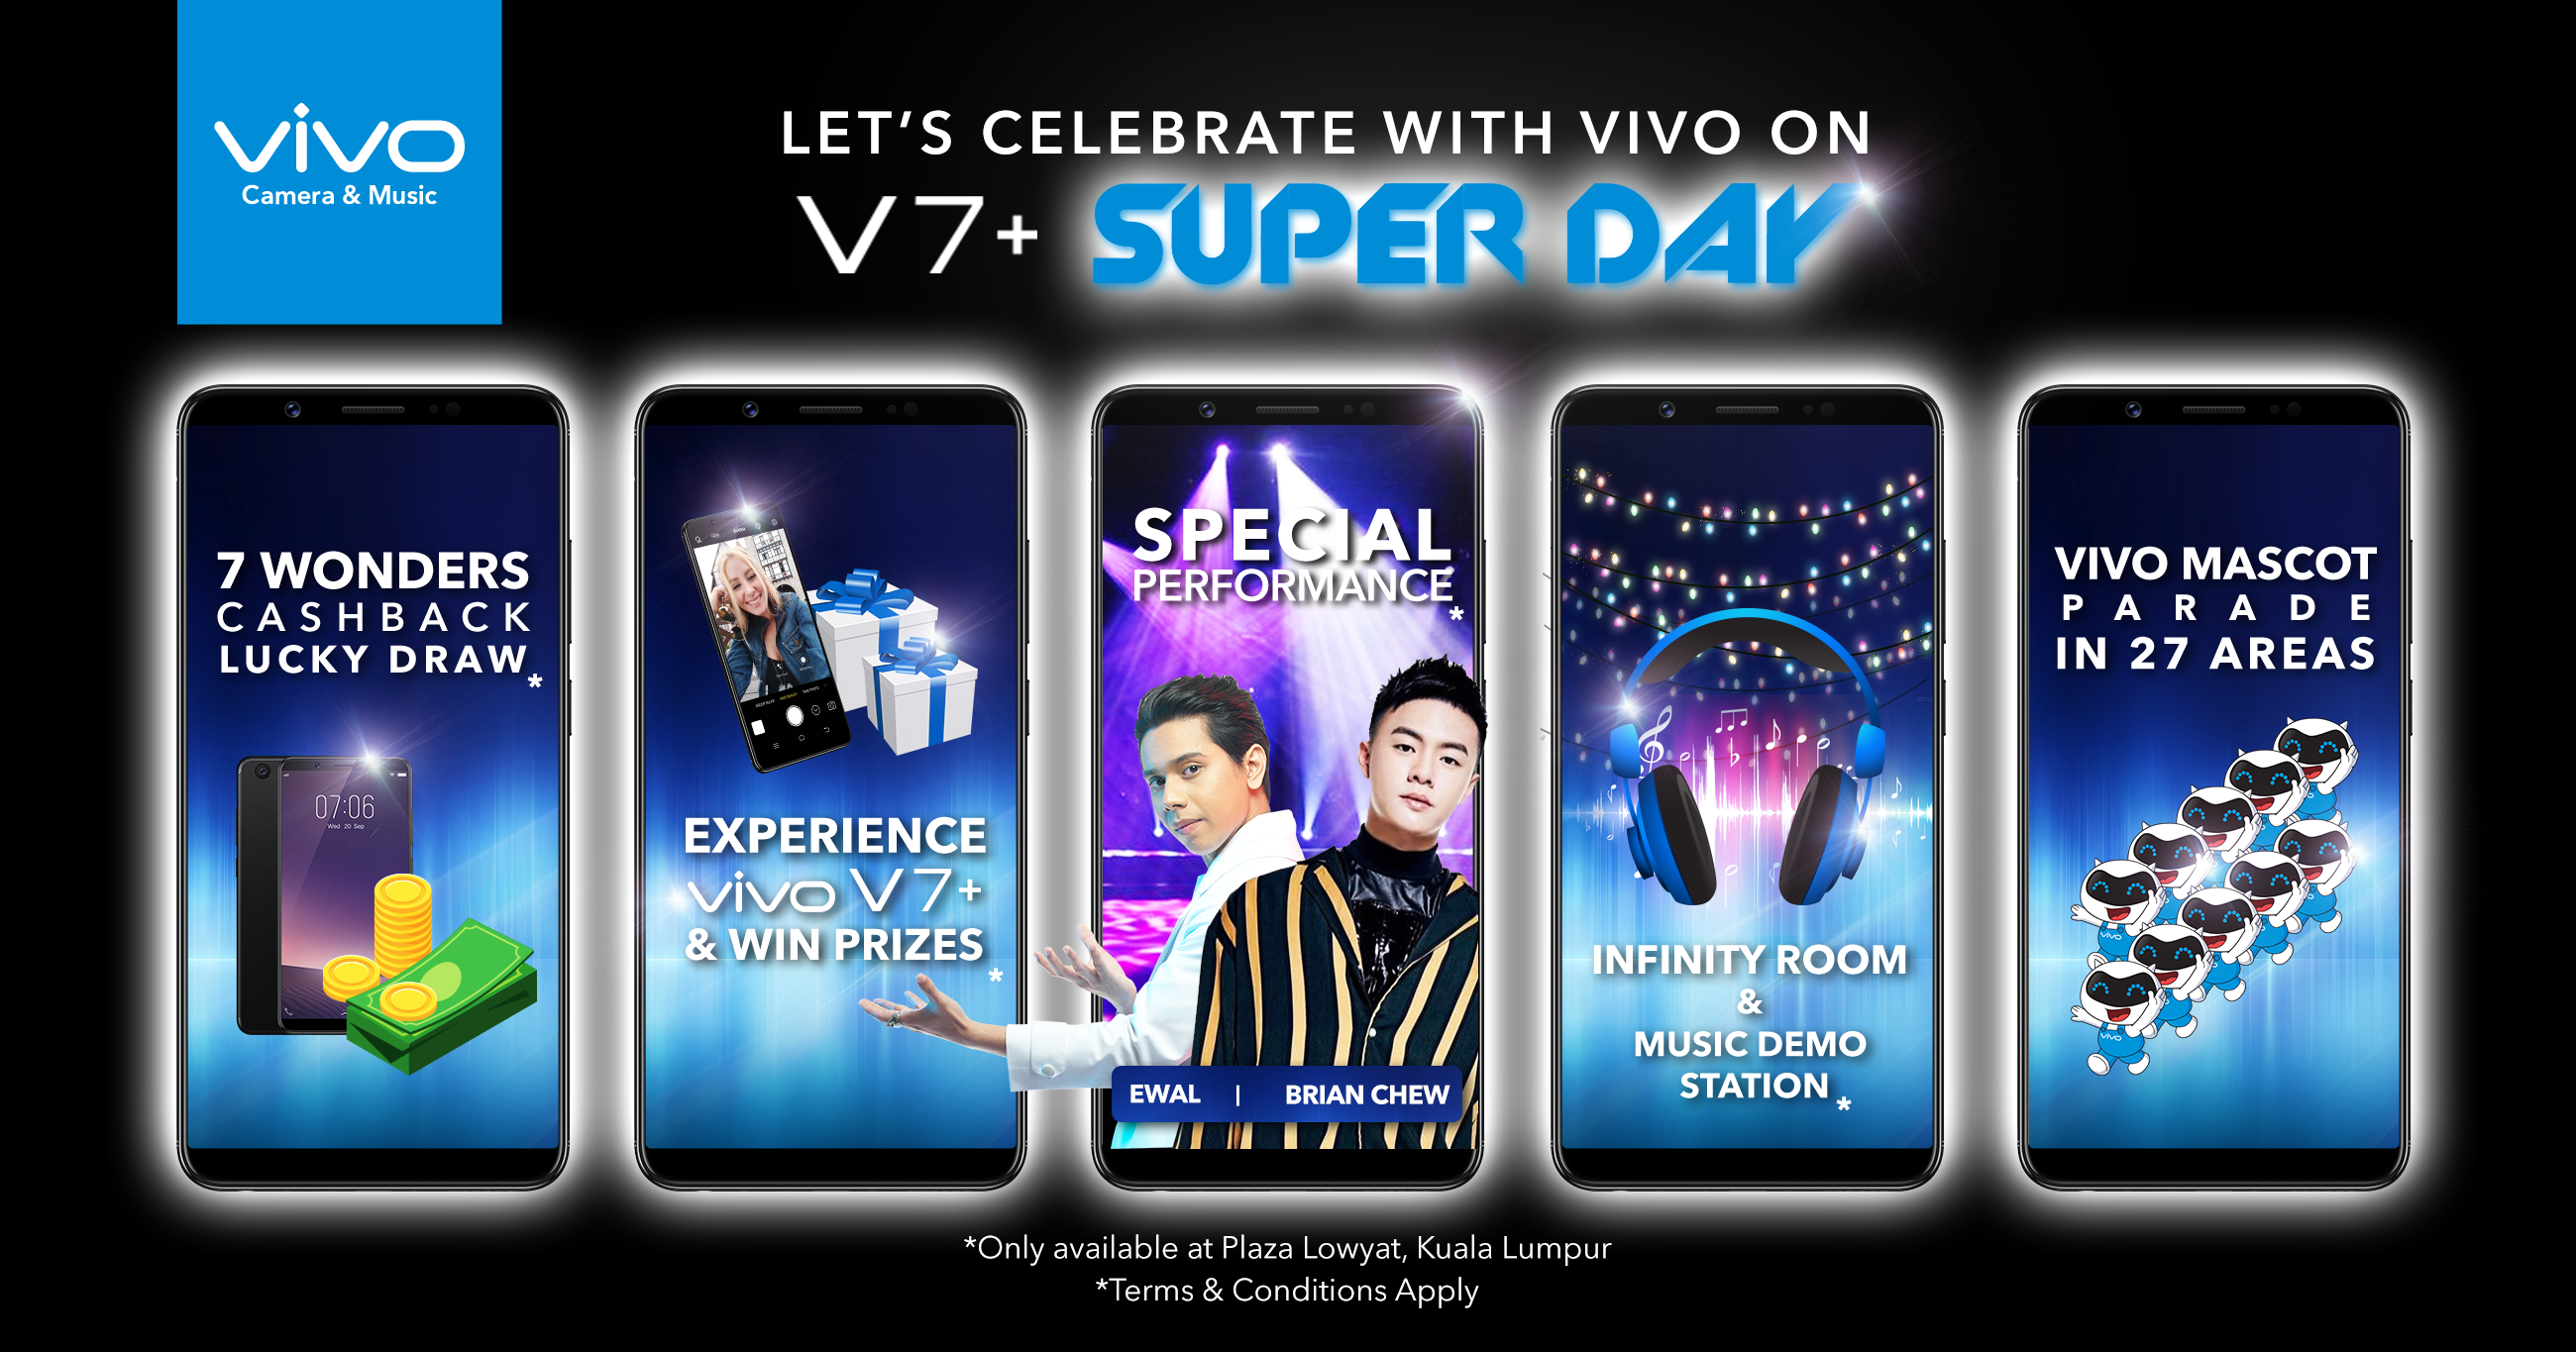 vivo Super Day launches today at Lowyat, offering free gifts and a first hand experience of vivo V7+